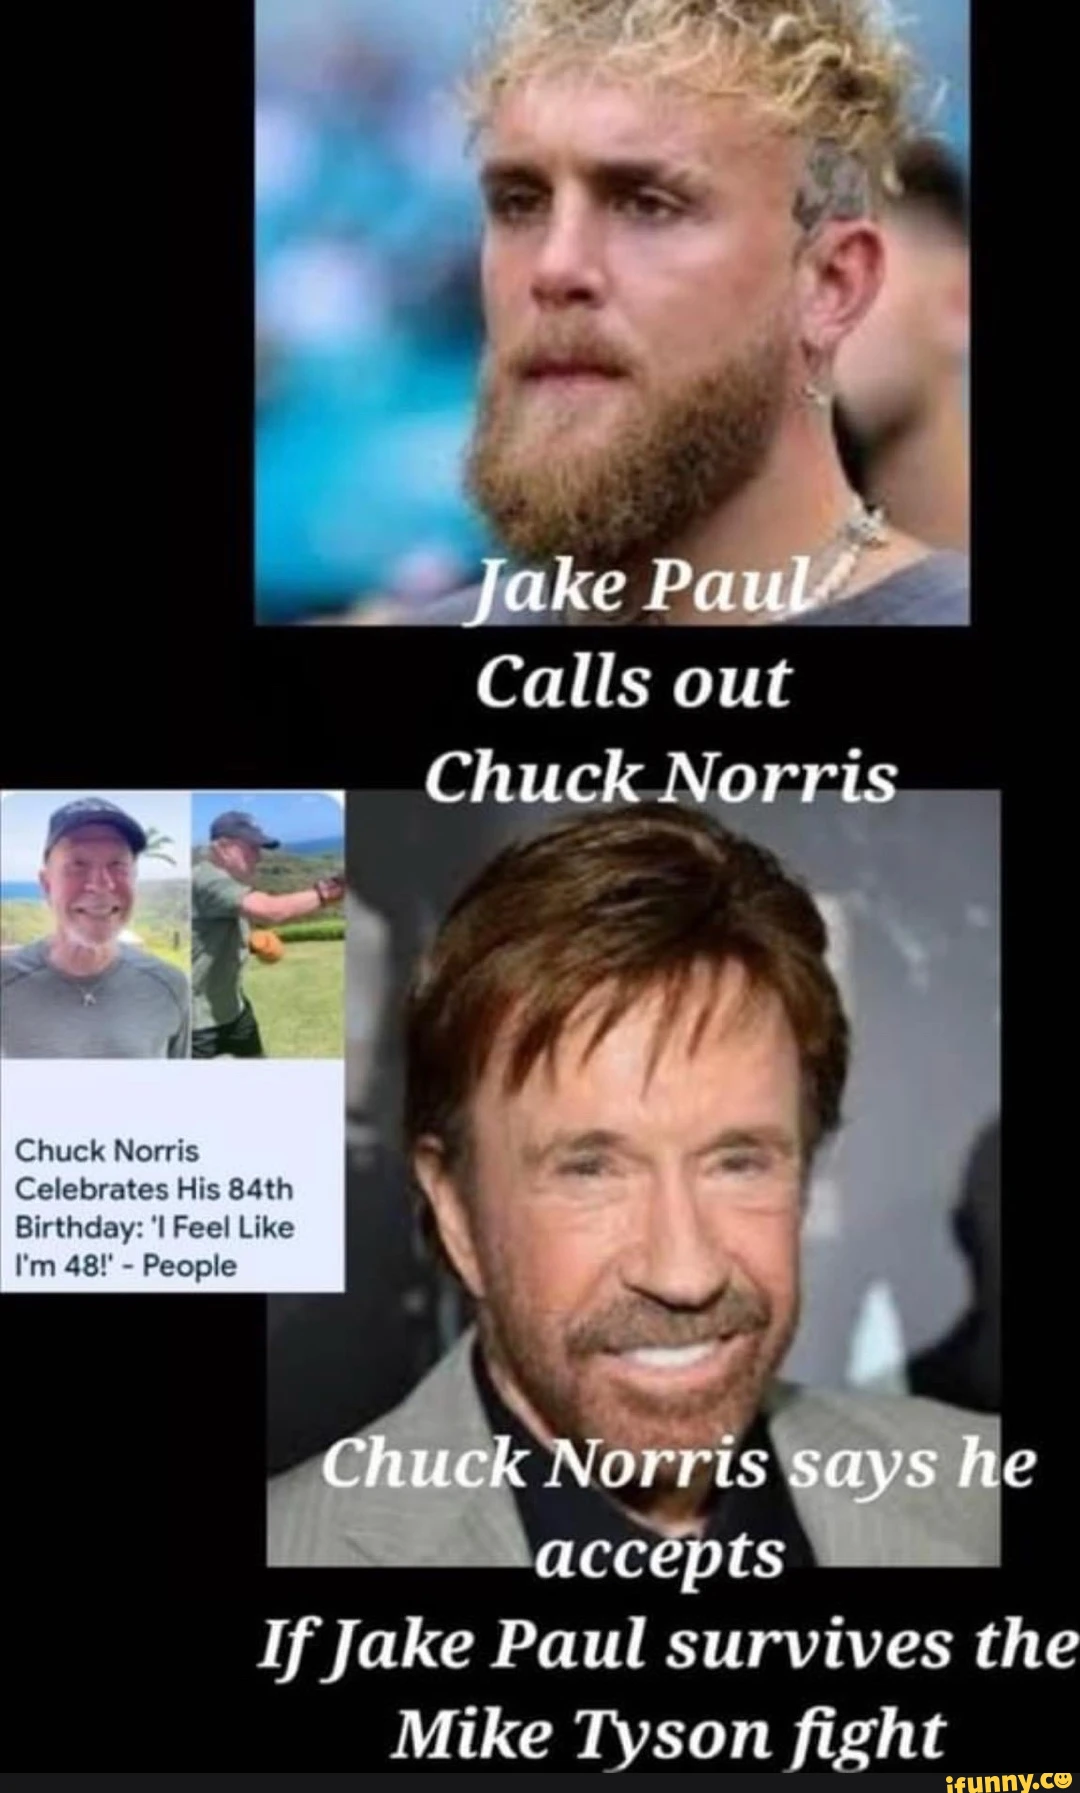 Jake Calls out Chuck Norris I Chuek Nerris Celebrates \ Birtheays Feel Like - People \ Chuck Norris says he accepts If Jake Paul survives the Mike Tyson fight